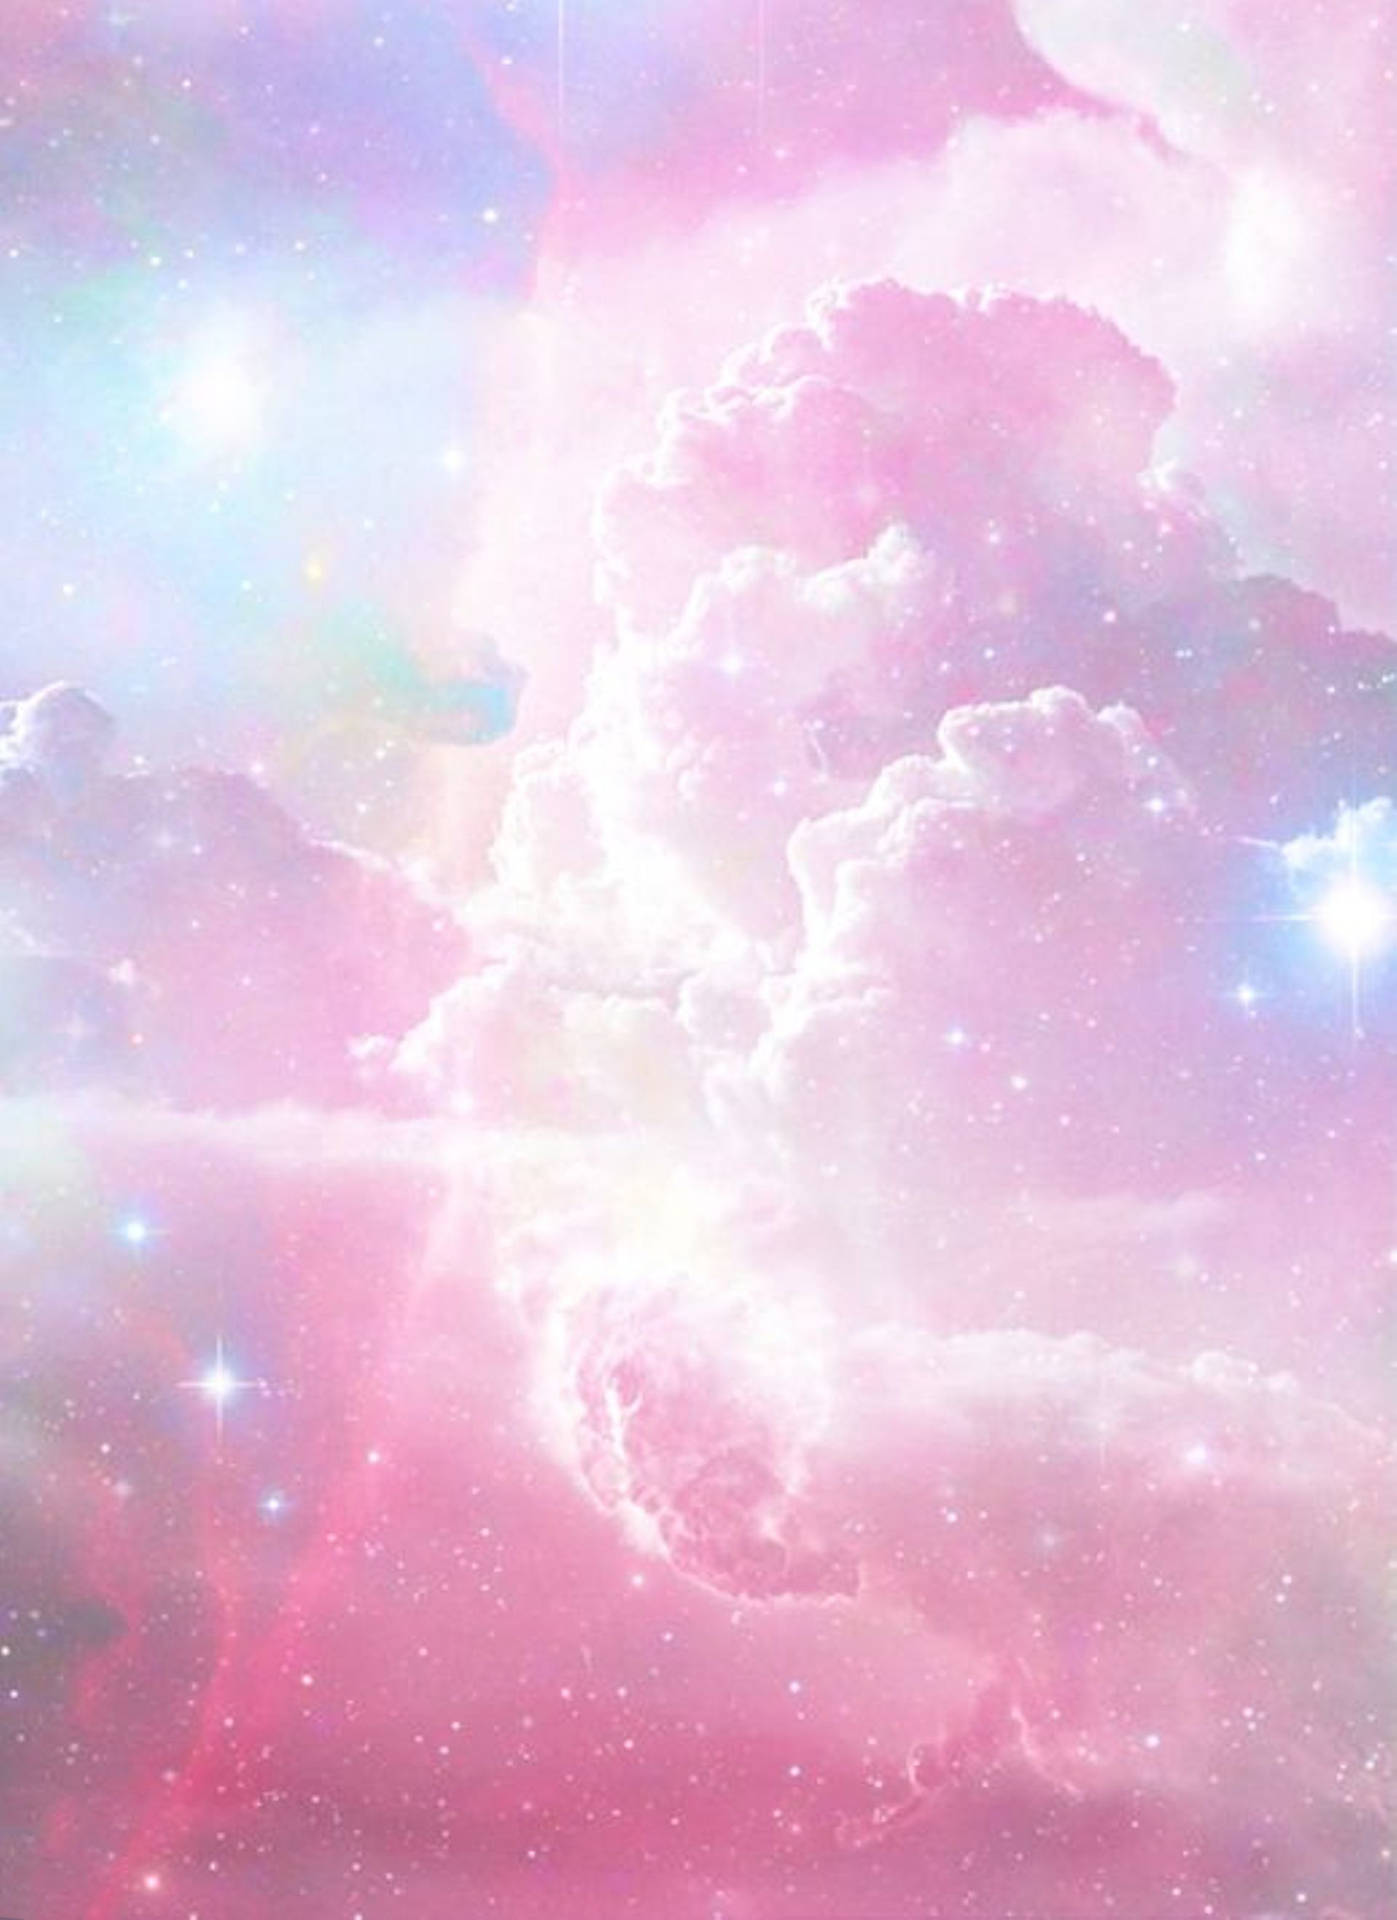 Cute Pastel Colors Sparkly Clouds Wallpaper